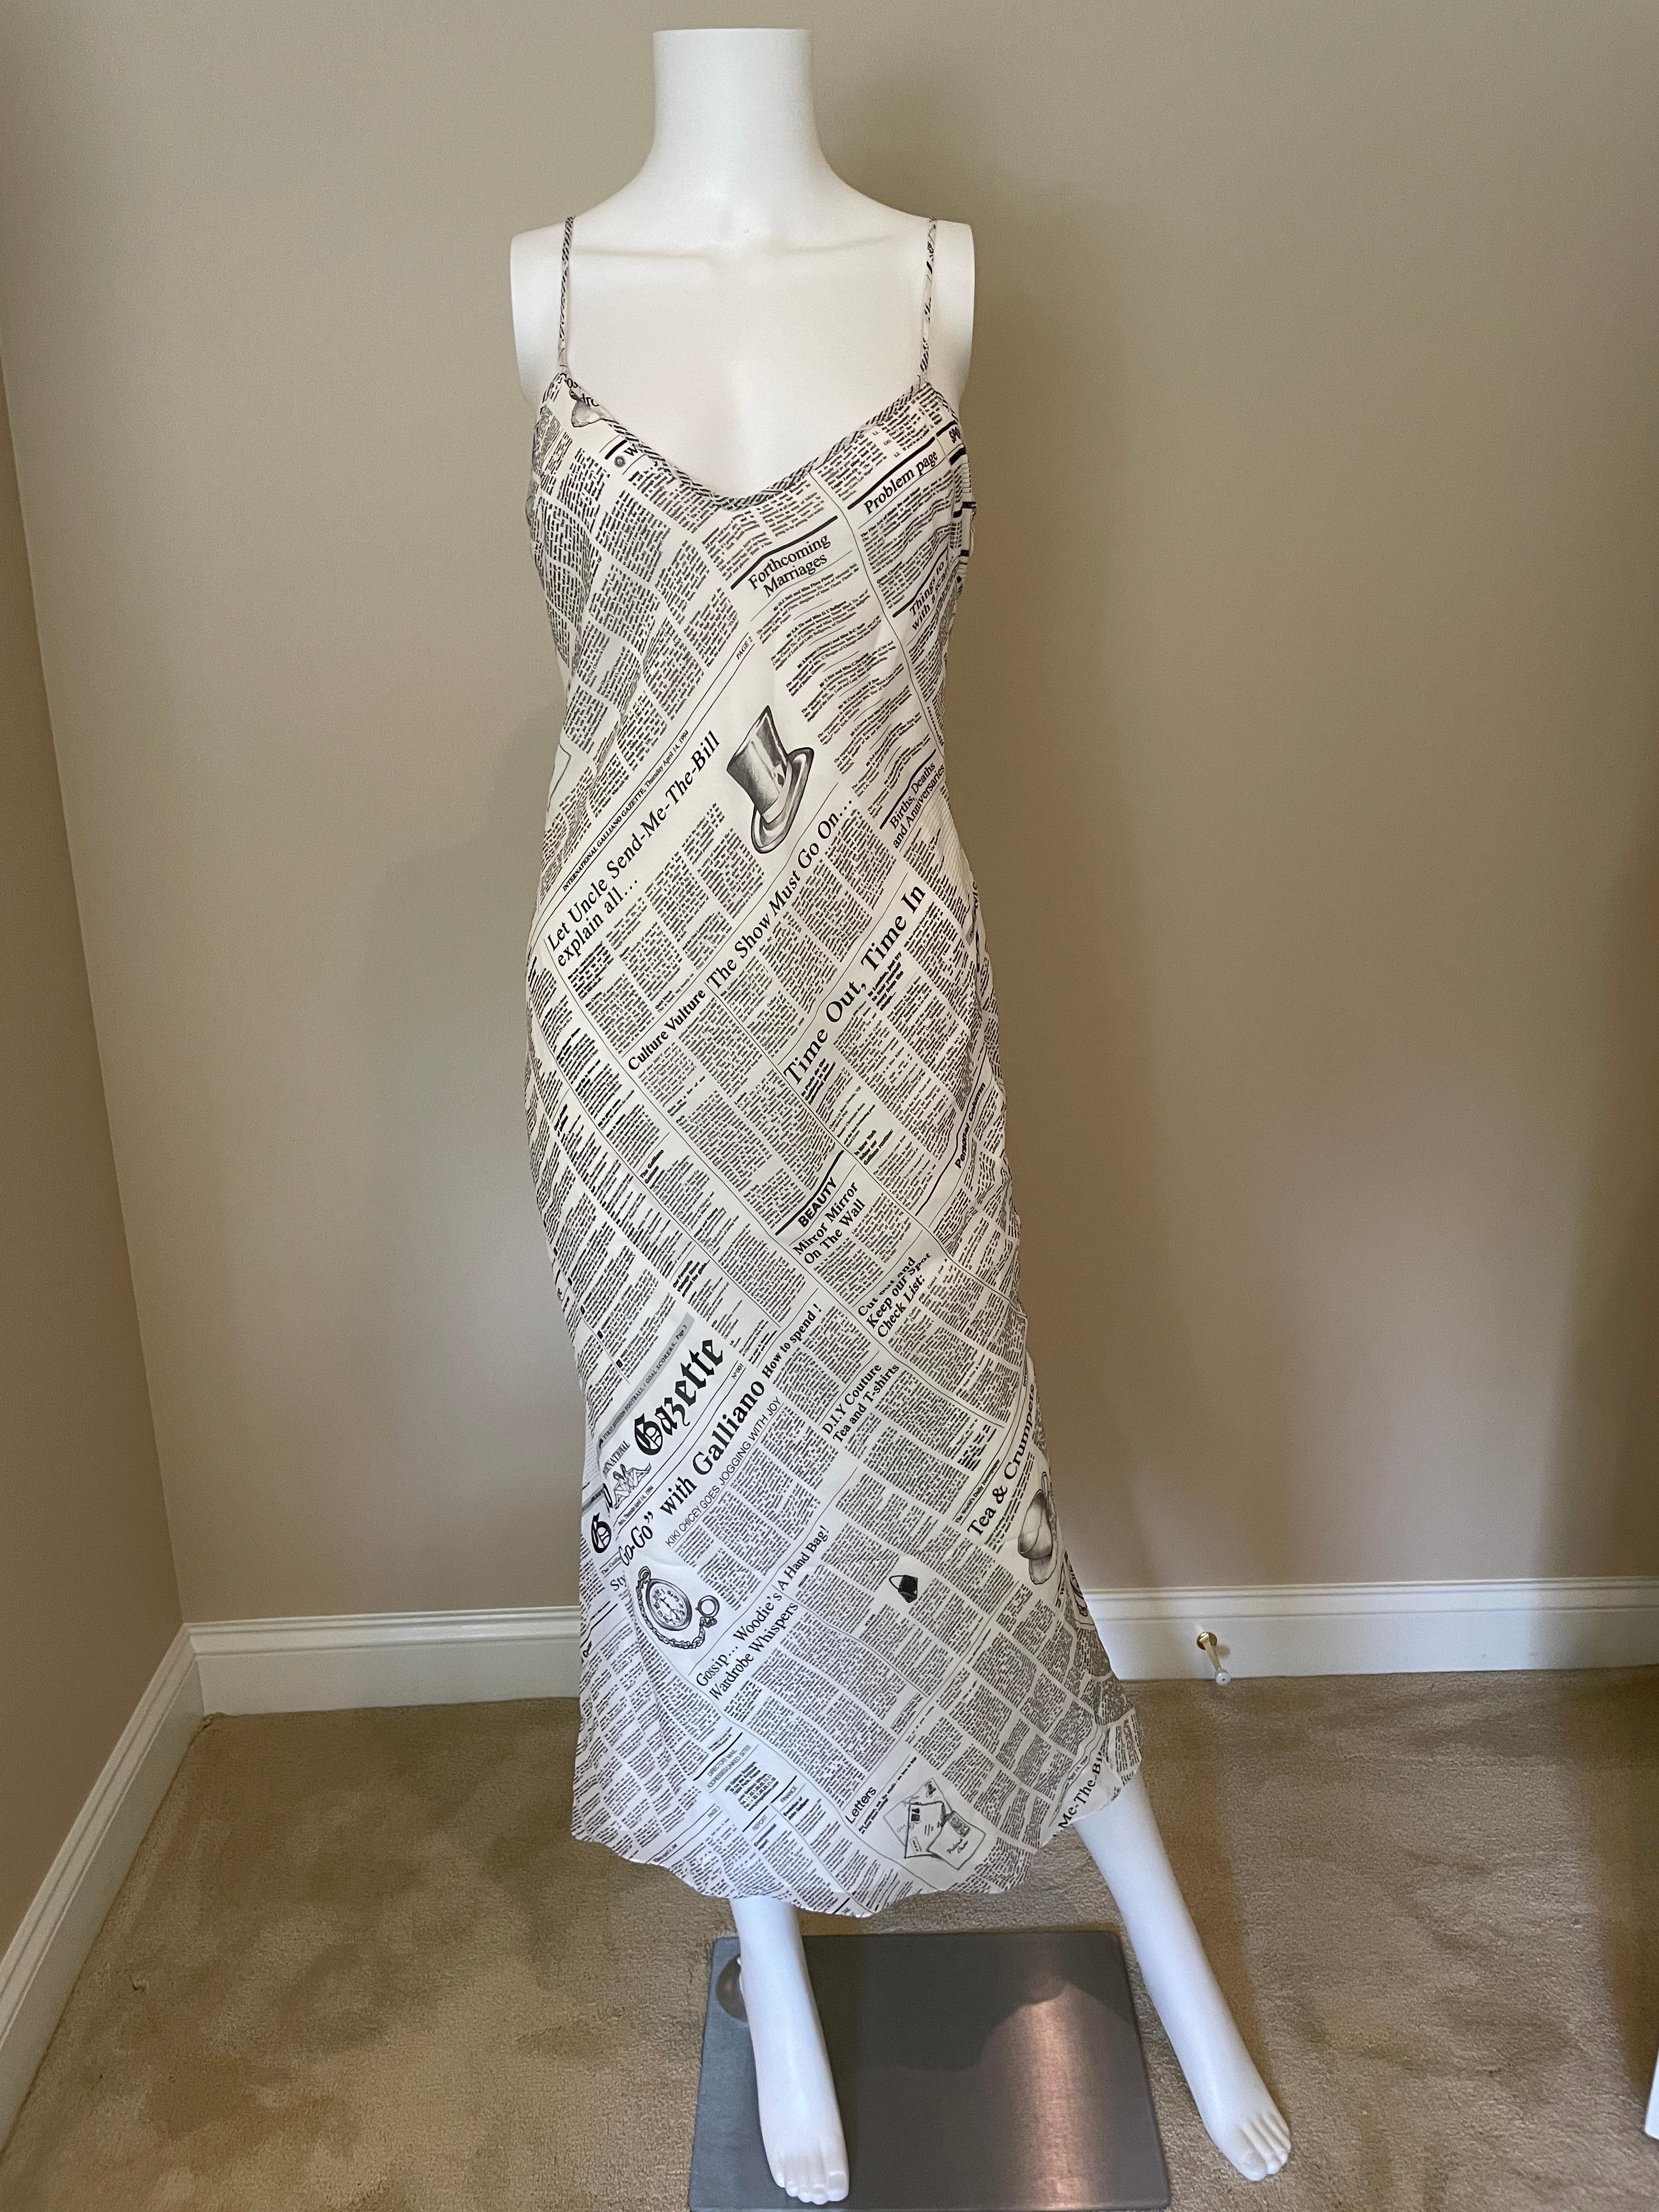 Runway Show Collection piece, new with tags, 2018 FW18 John Galliano famous newspaper gazette print. 100% silk slip dress, lined. No flaws. Has some stretch to it. I believe this can fit an array of sizes. Marked F40.